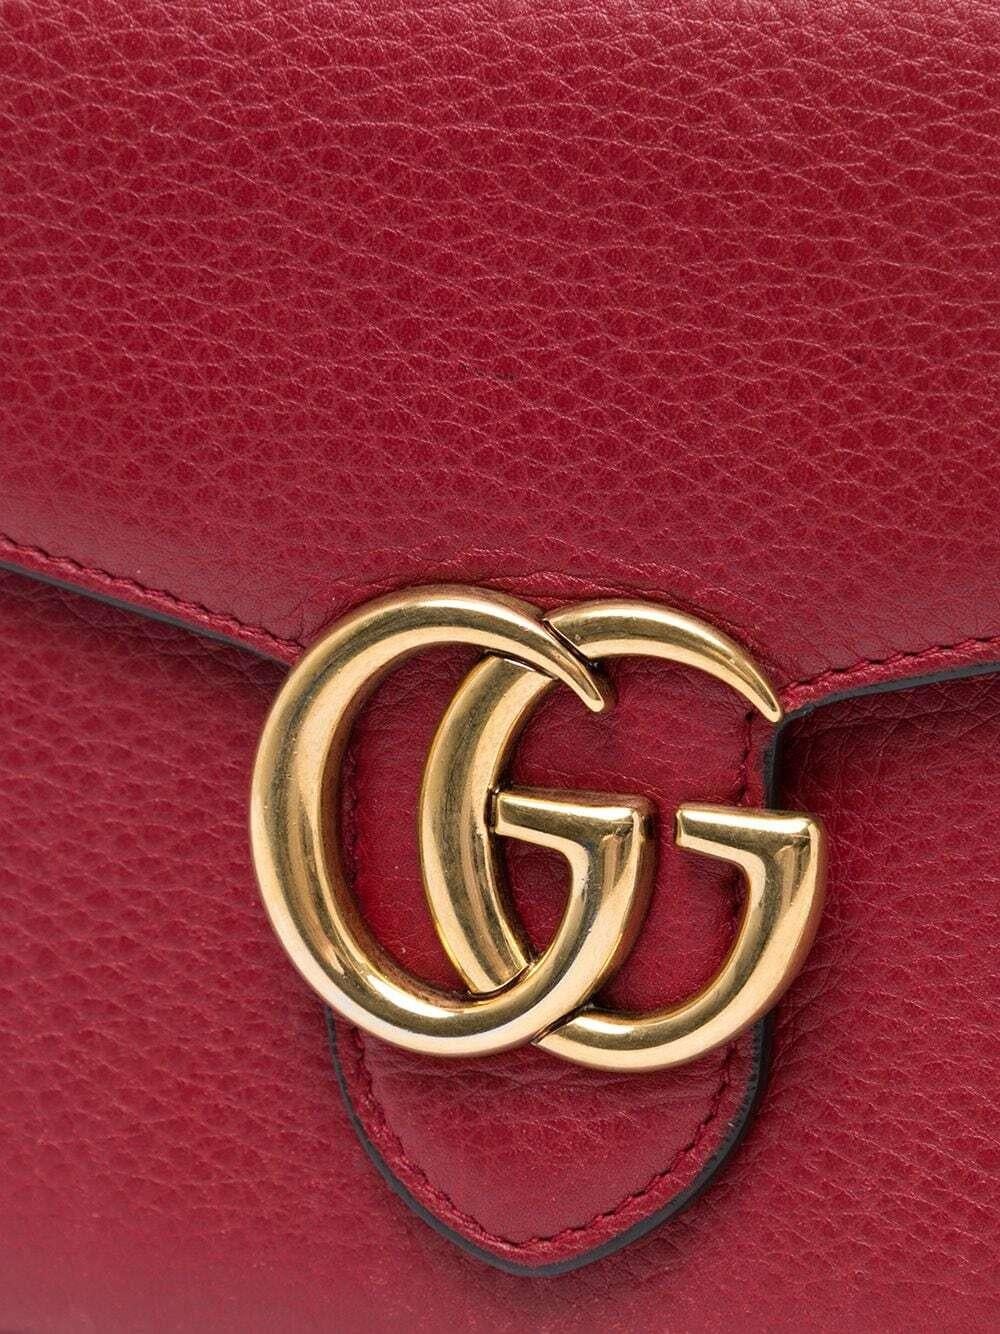 gucci wallet on chain